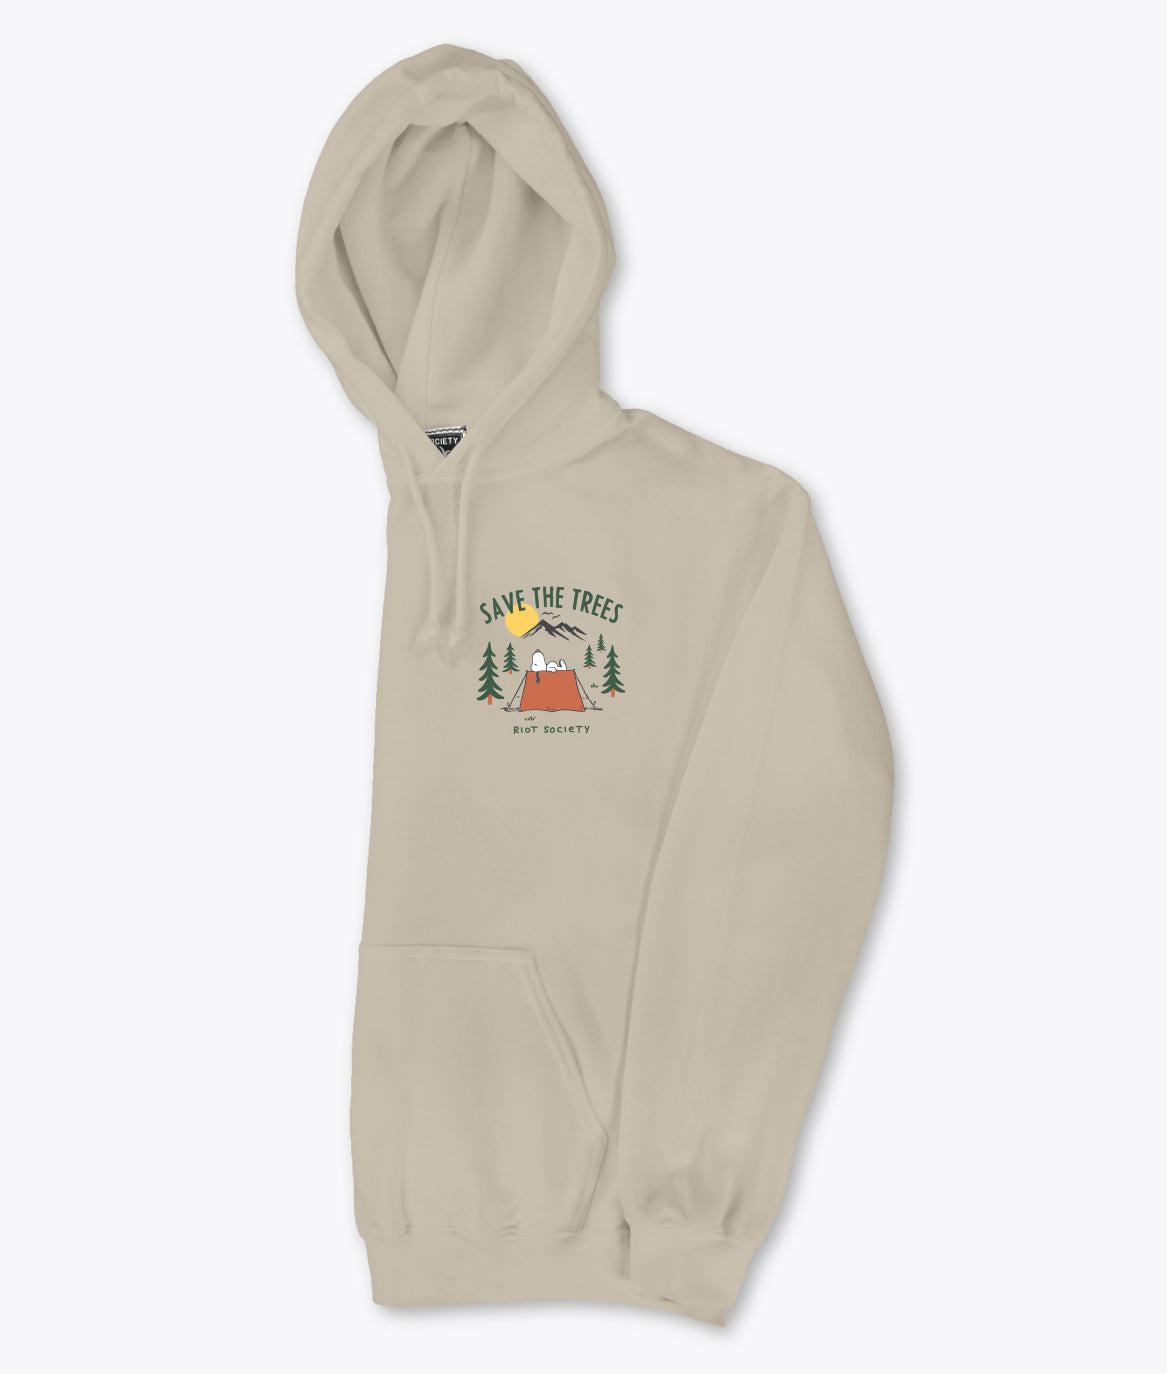 Peanuts Snoopy Save the Trees Womens Hoodie - - Riot Society